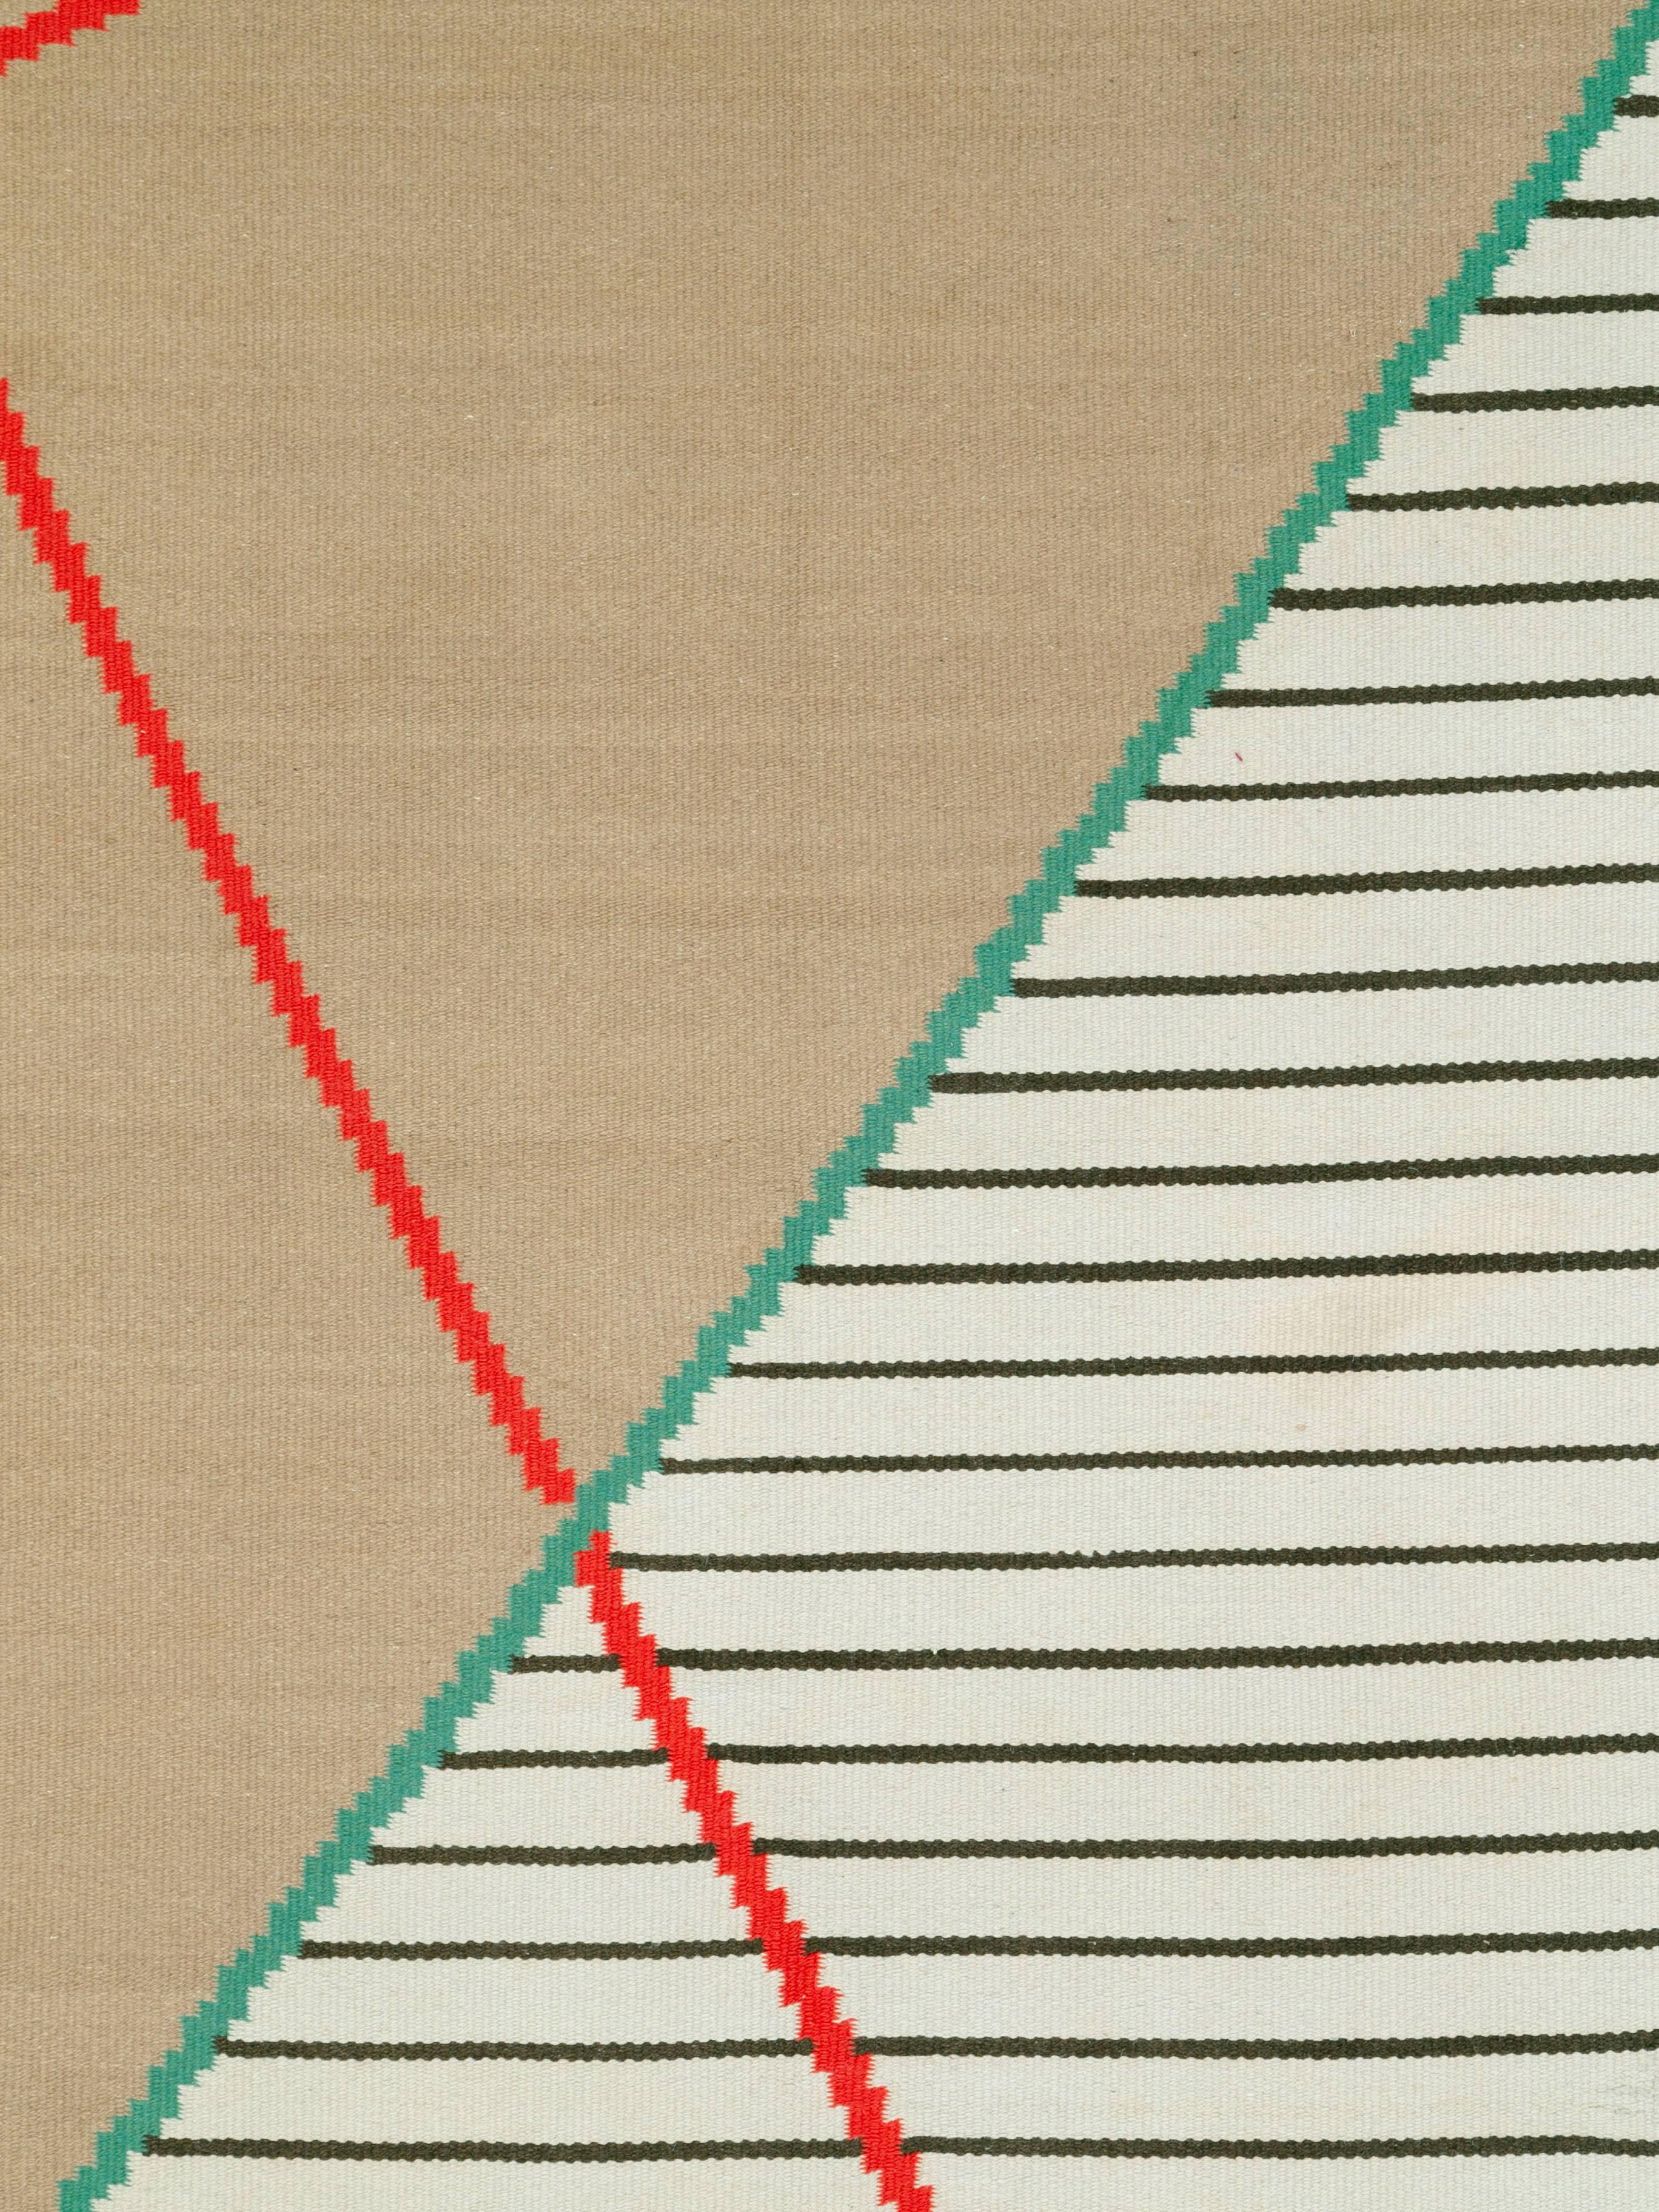 A vintage Czech flat-woven Kilim from the mid-20th century by Antonín Kybal.